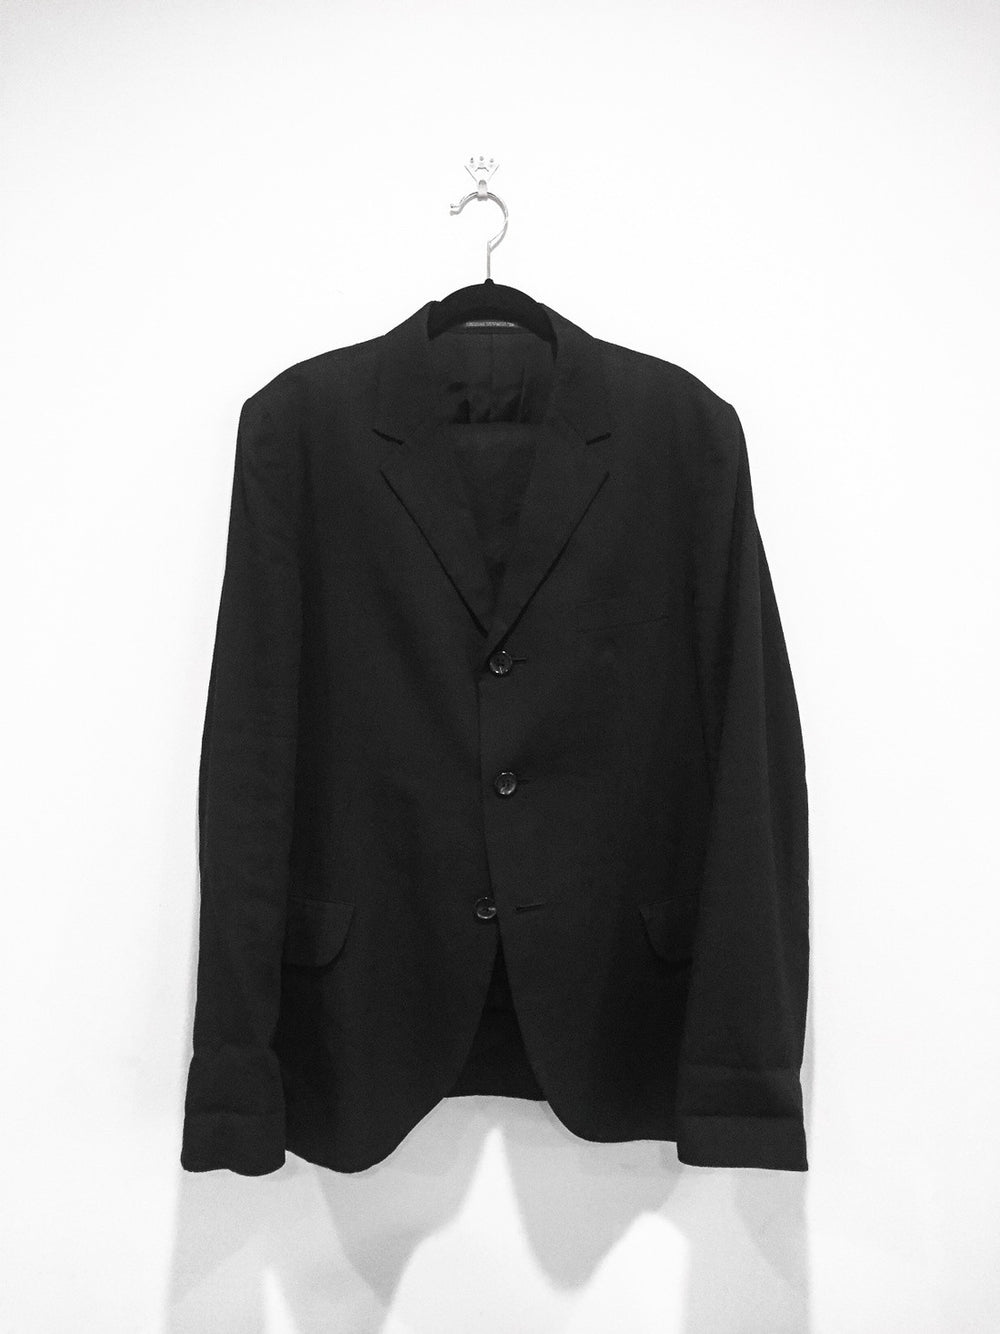 Yohji Yamamoto Pour Homme SS09 Don't Do That Suit